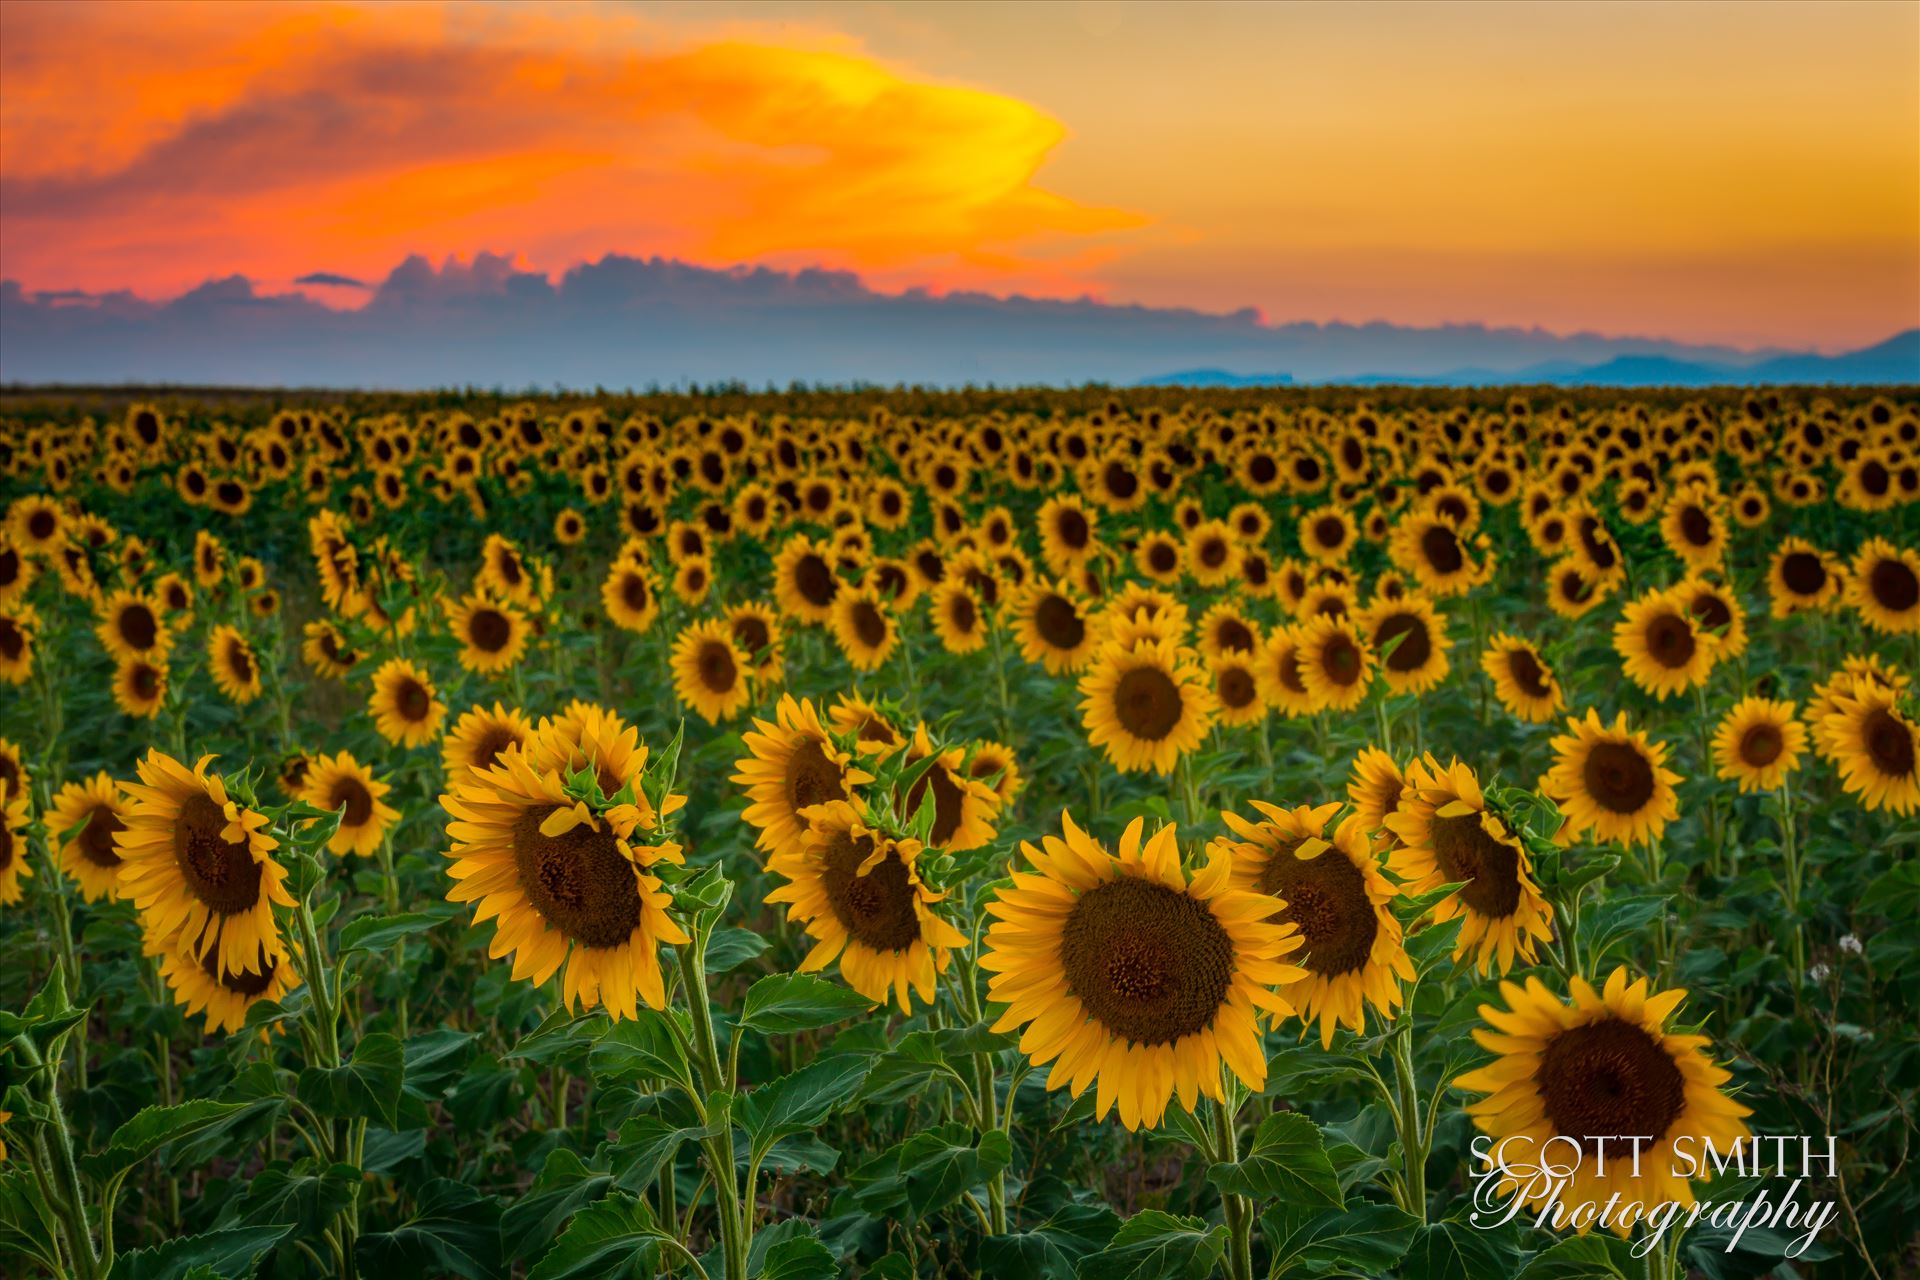 Denver Sunflowers at Sunset No 3 - Sunflower fields near Denver International Airport, on August 20th, 2016. Near 56th and E470. by Scott Smith Photos